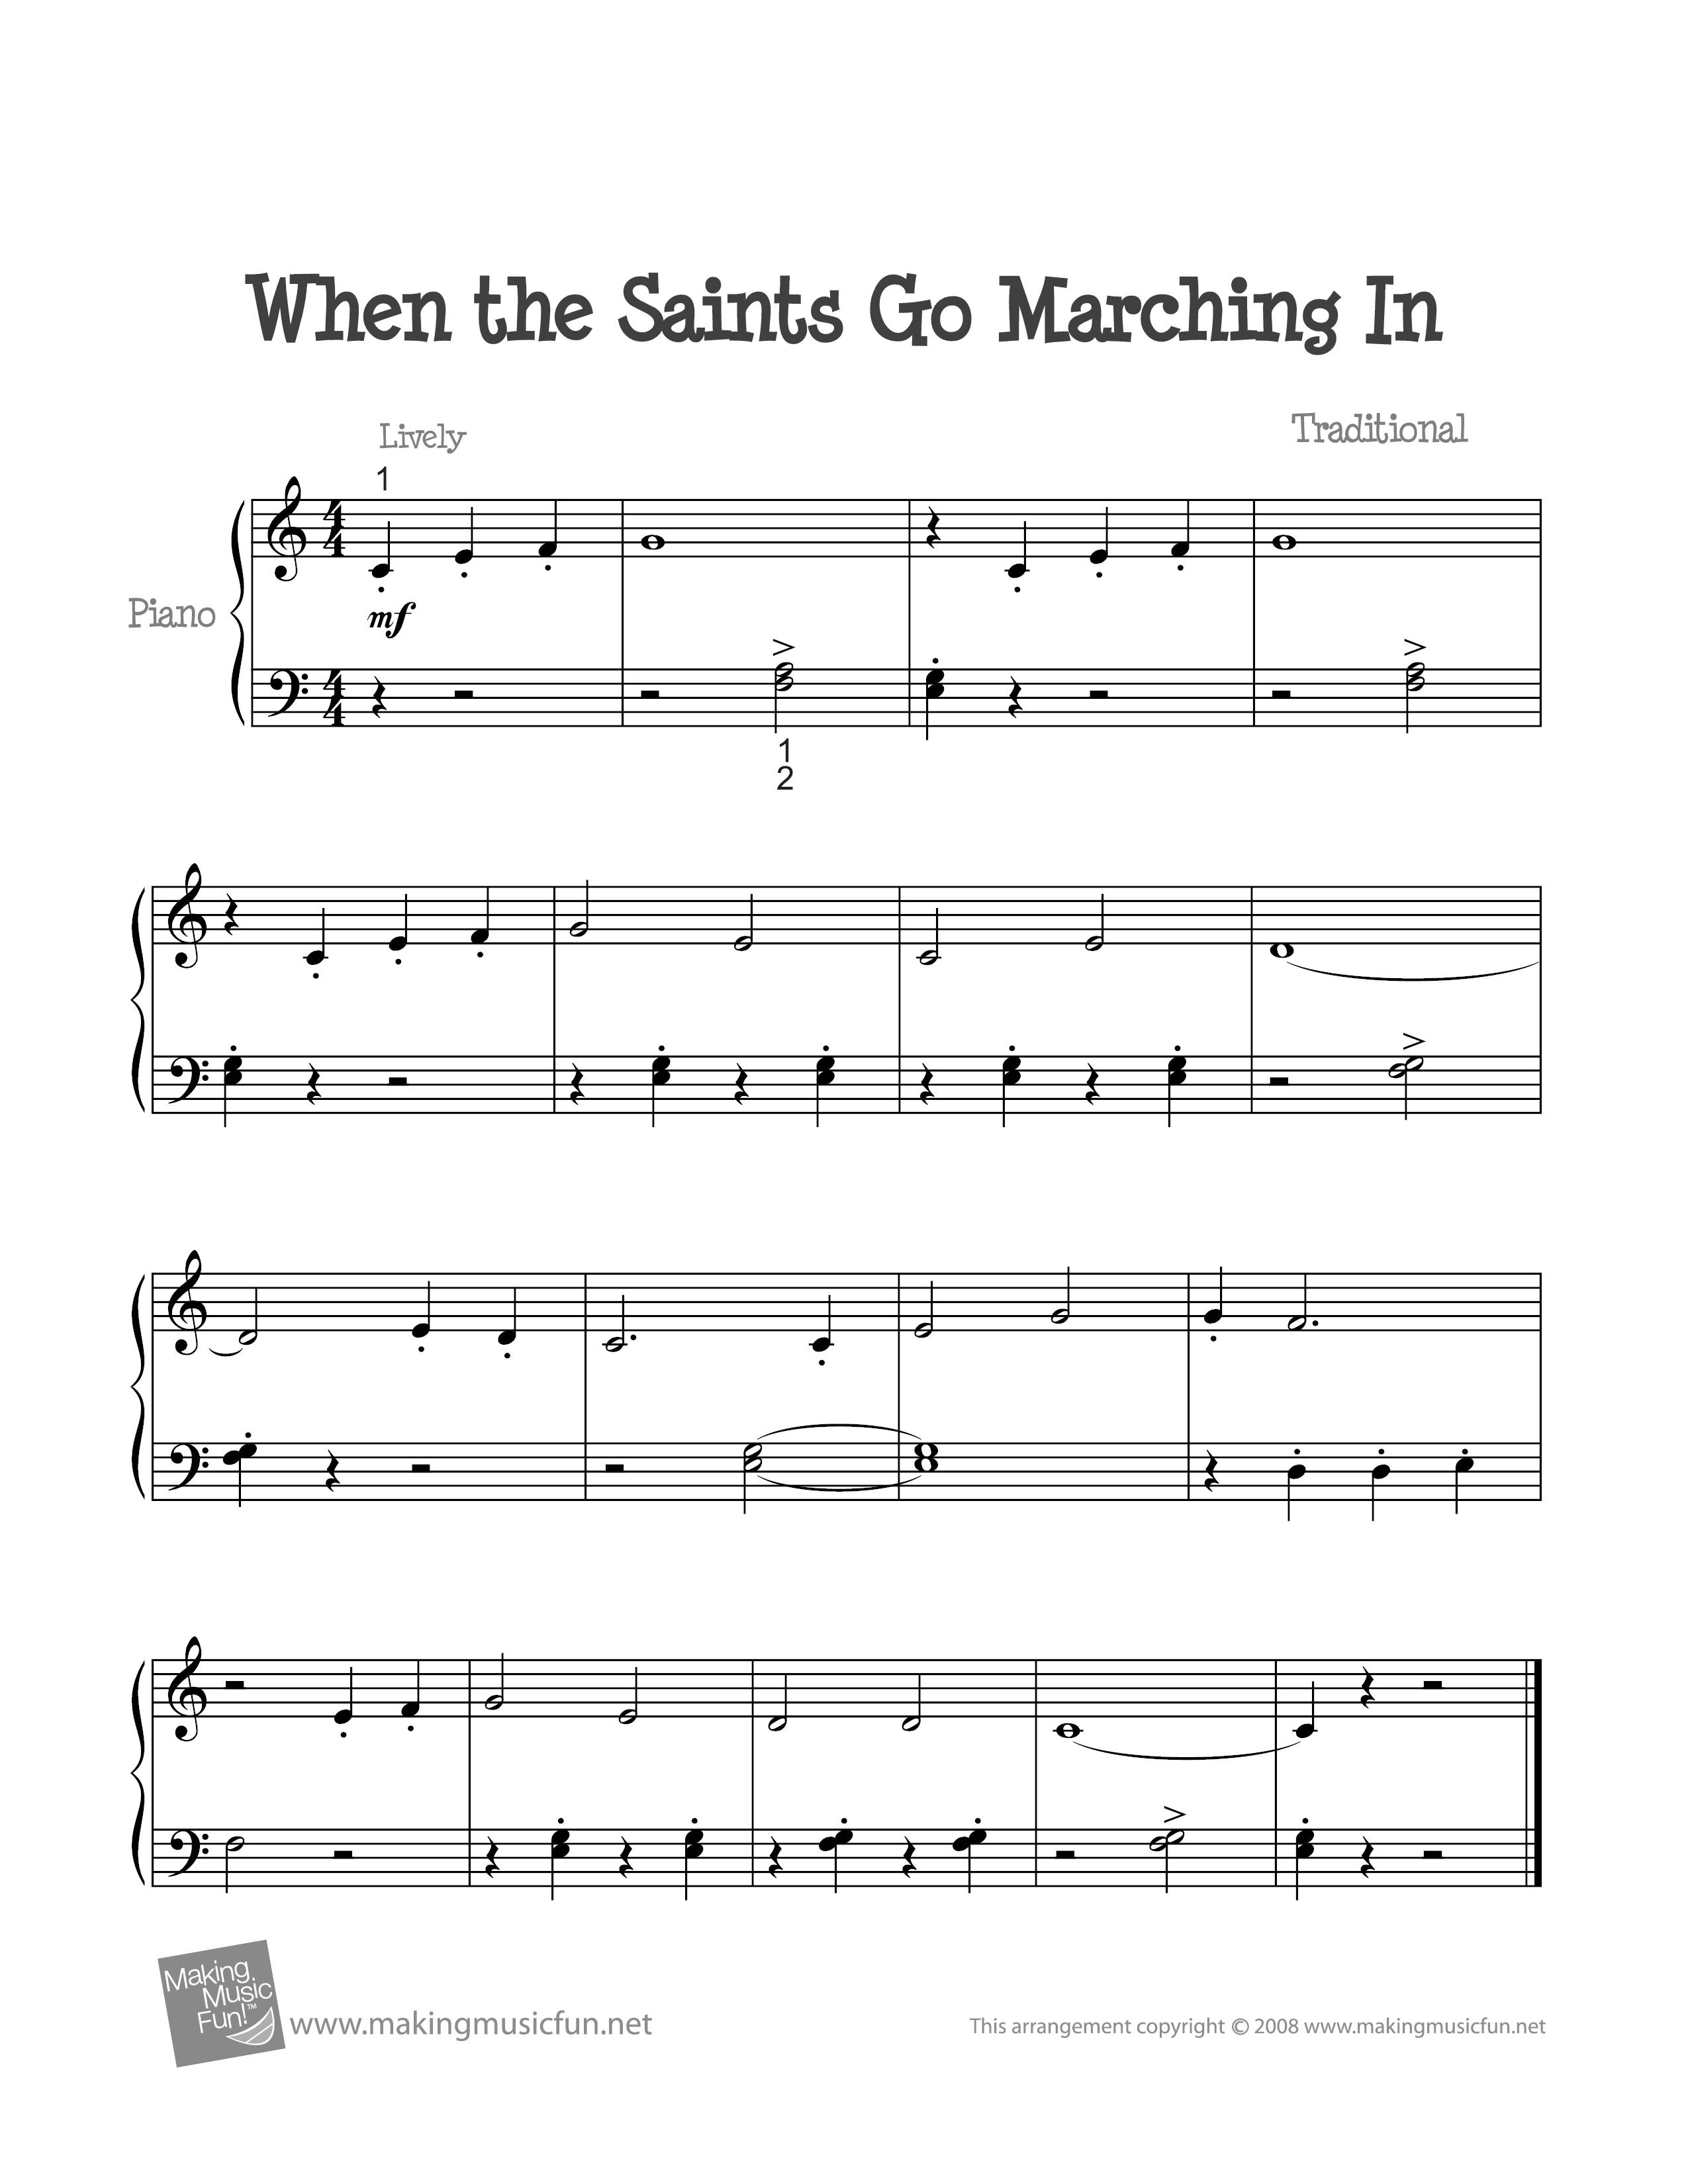 When the Saints Go Marching In Score